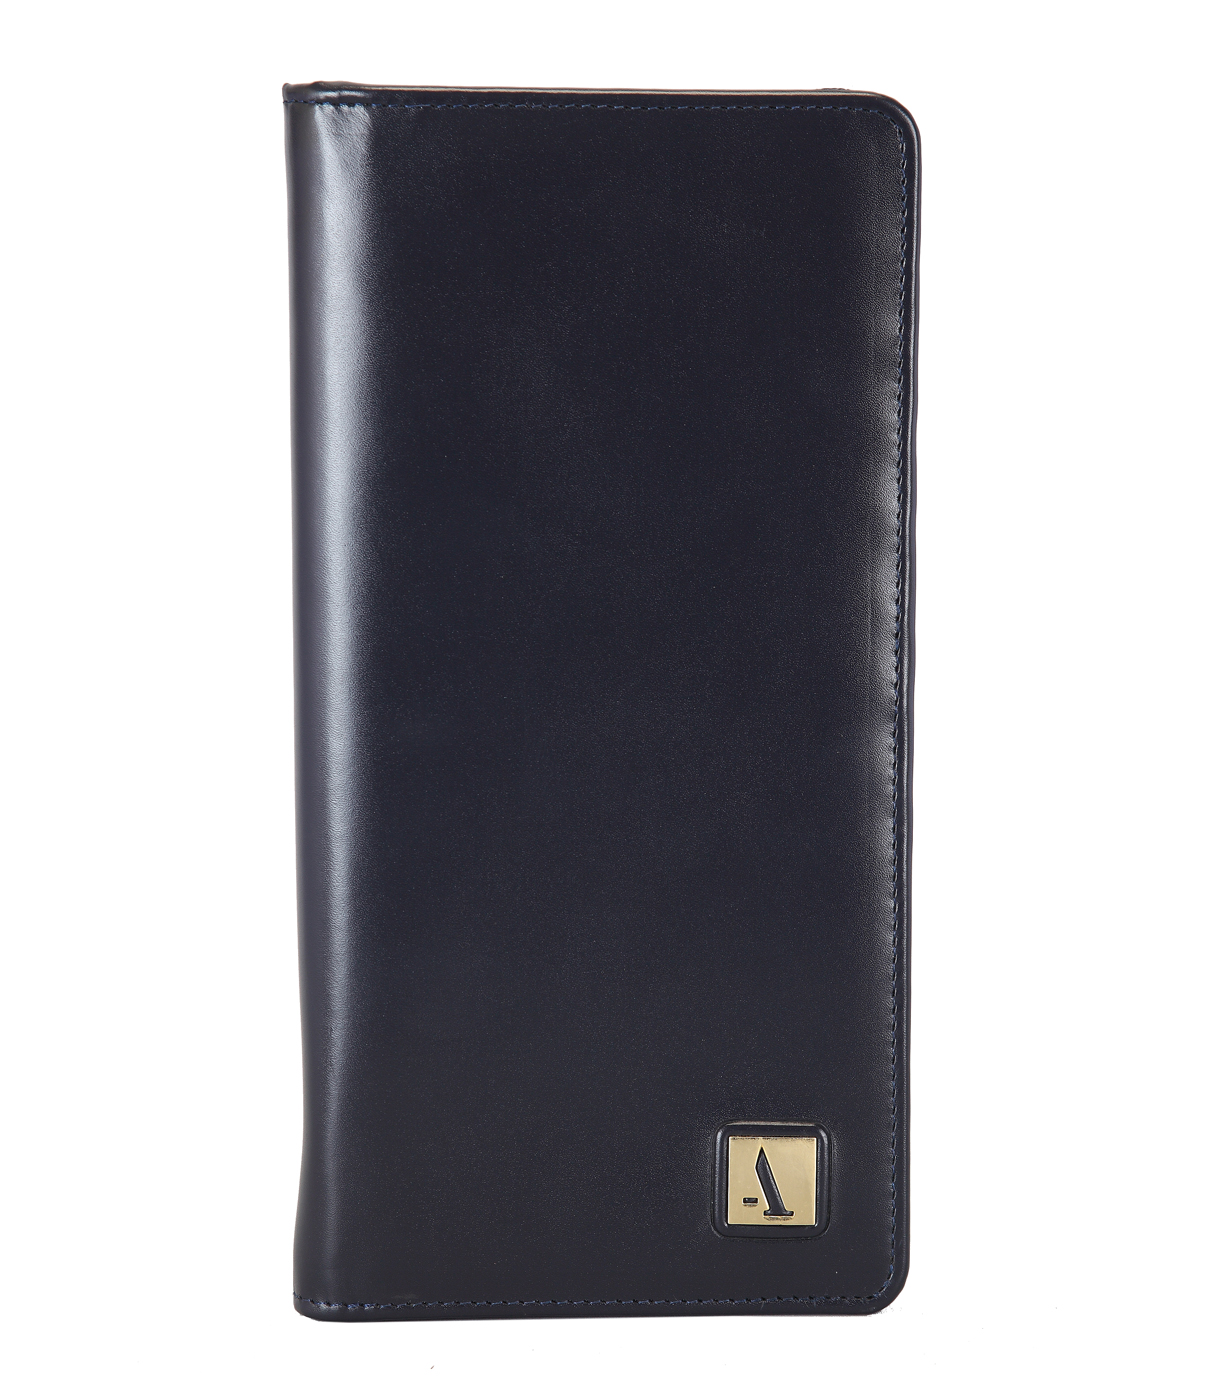 W13-Pablo-Travel document wallet in Genuine Leather - Black